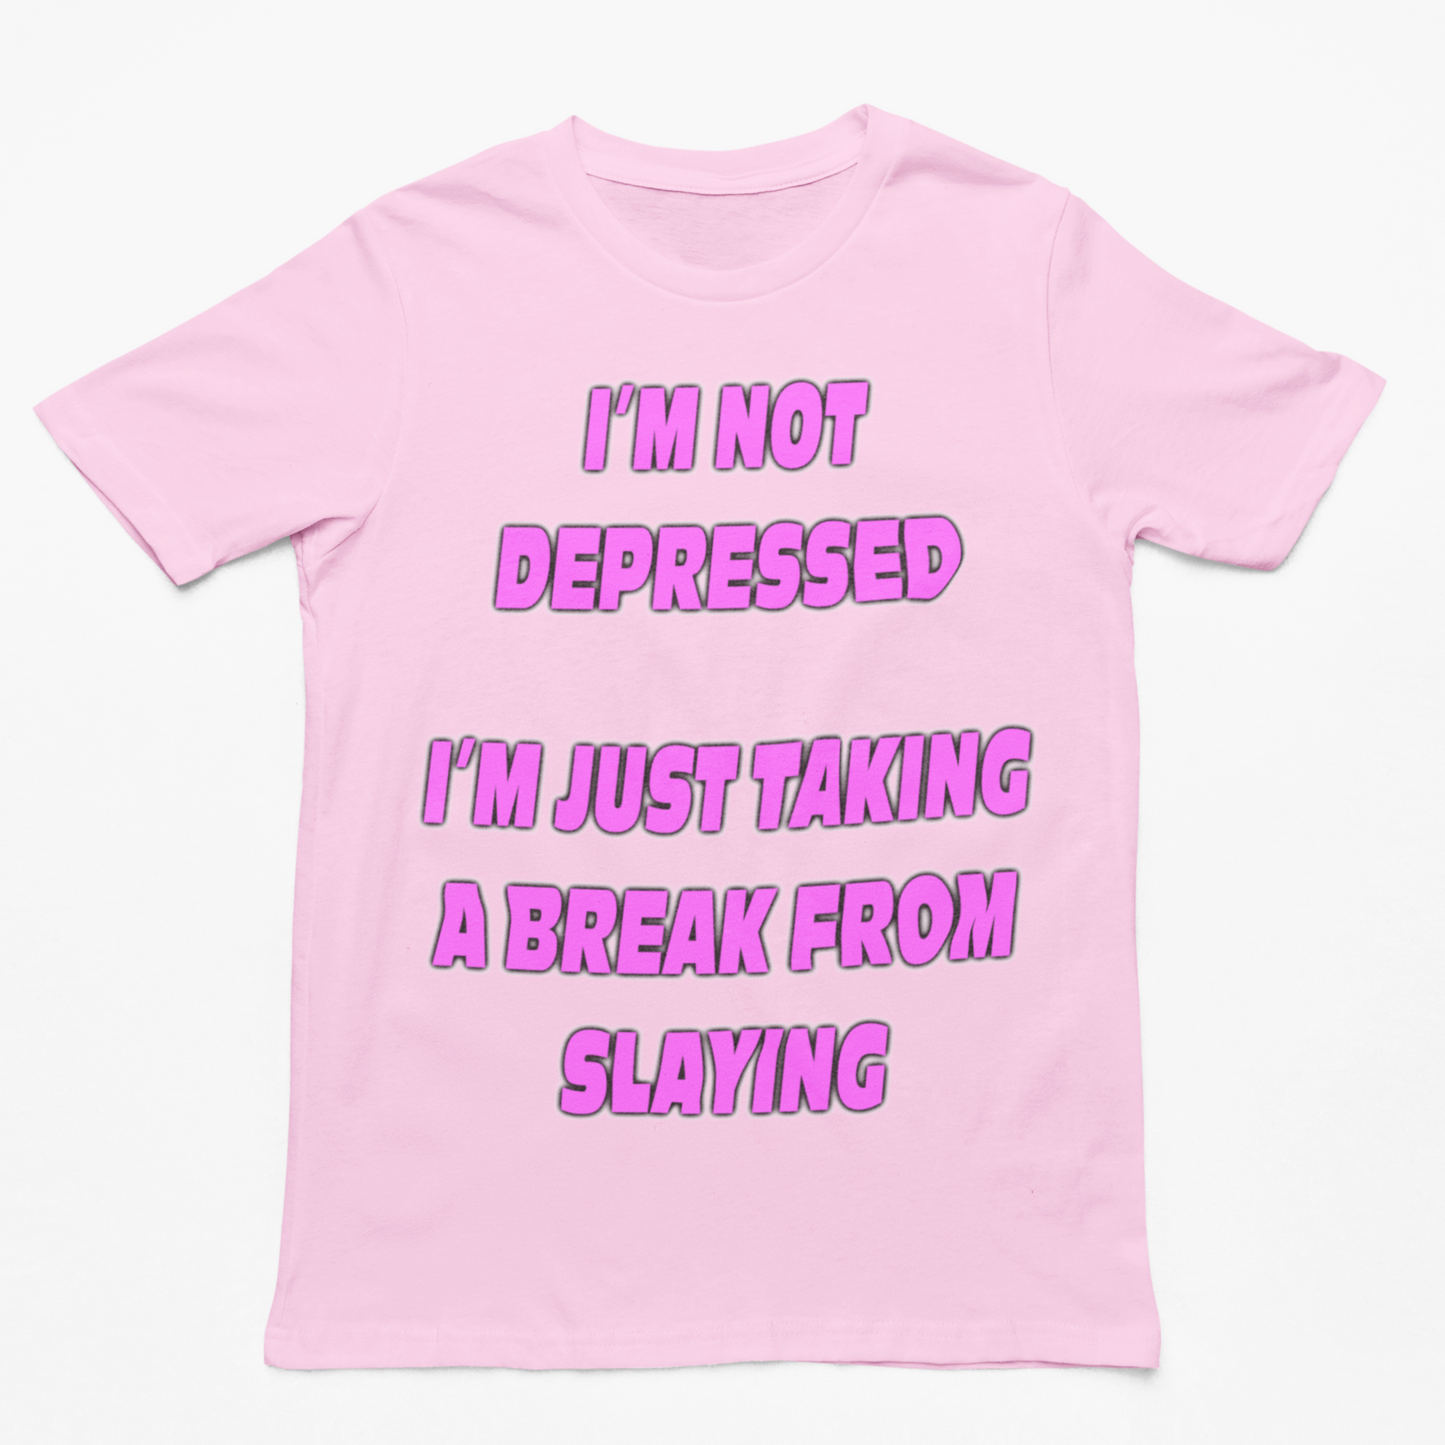 I'm Not Depressed I'm Just Taking a Break From Slaying t-shirt